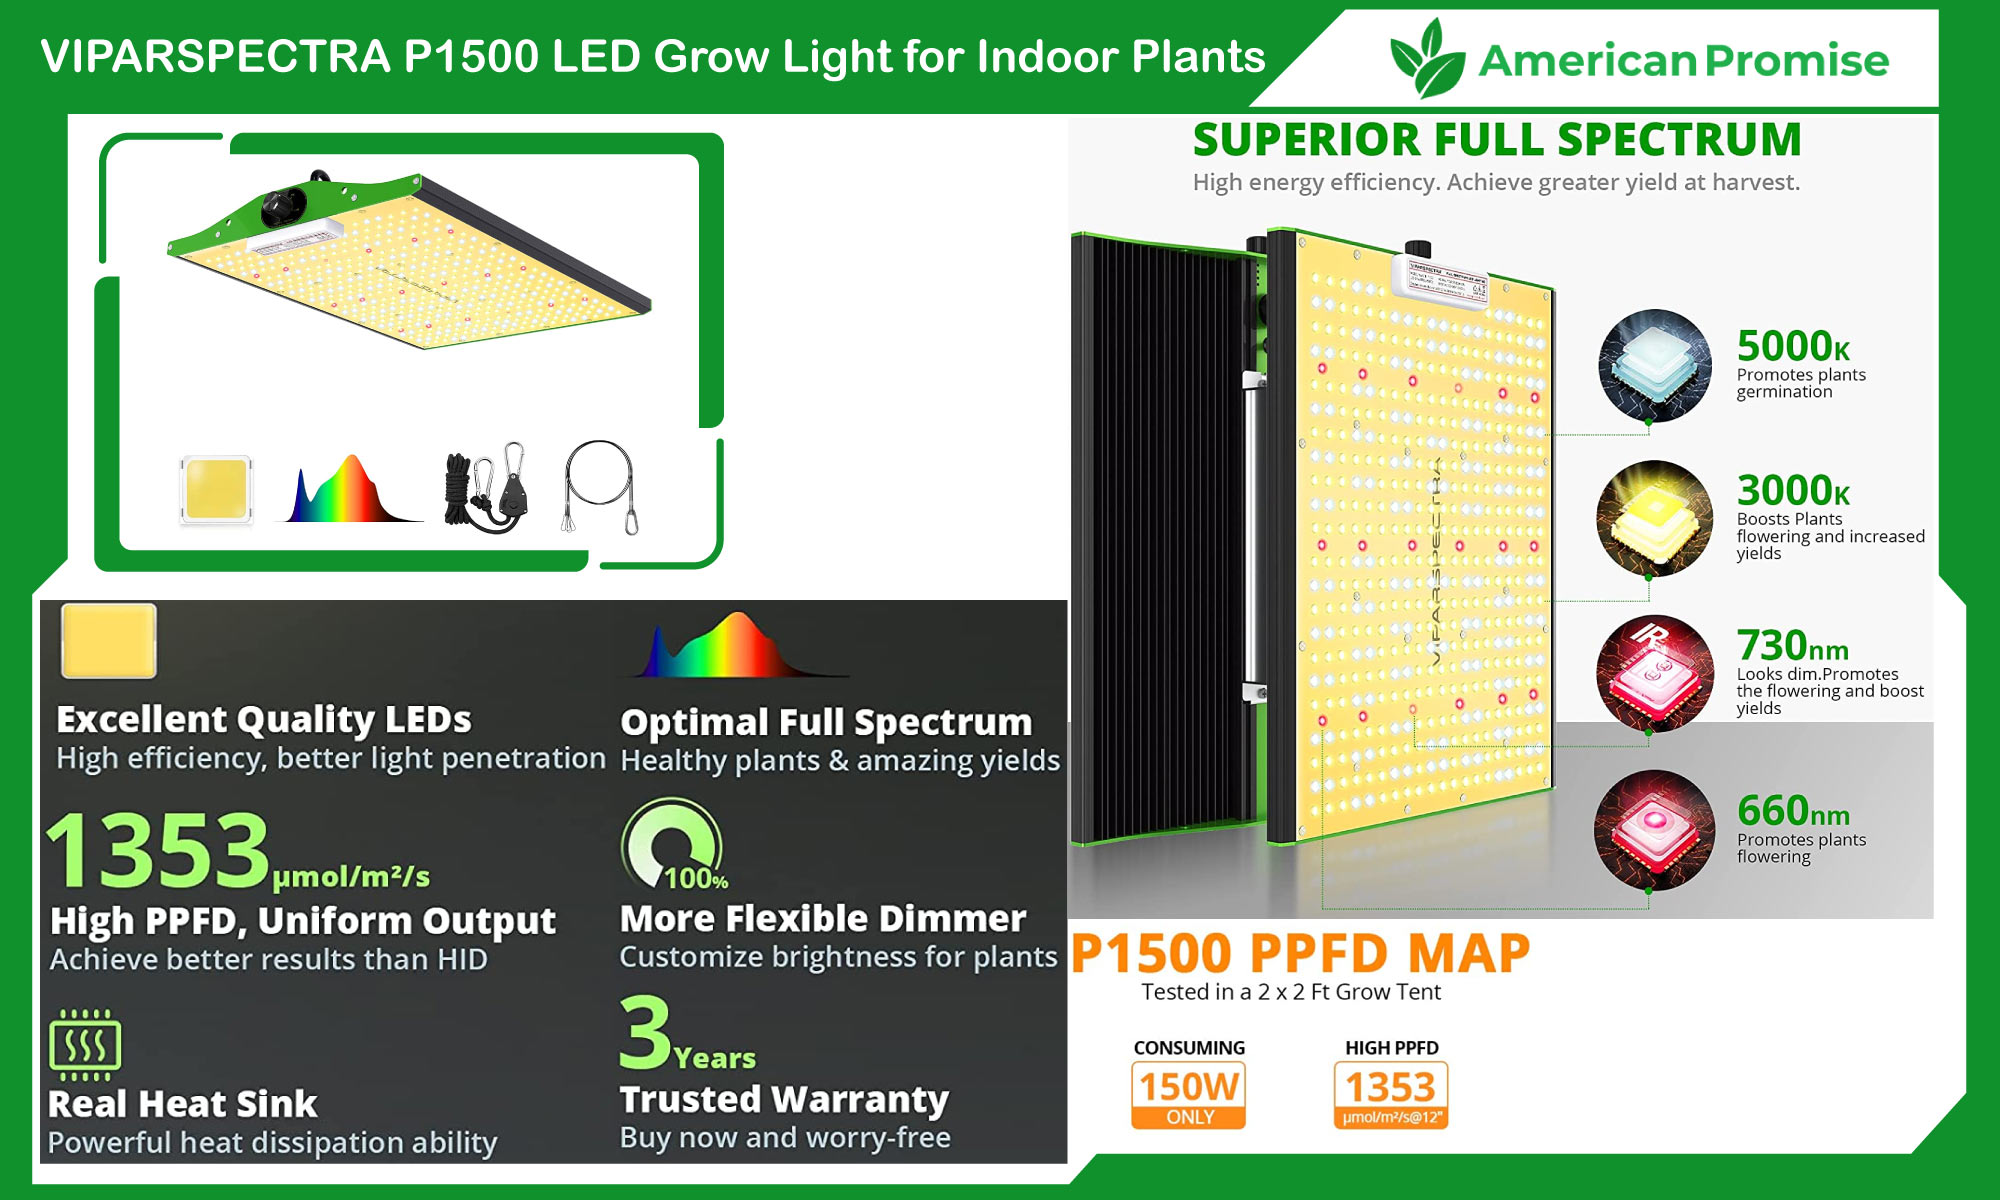 VIPARSPECTRA P1500 LED Grow Light for Indoor Plants